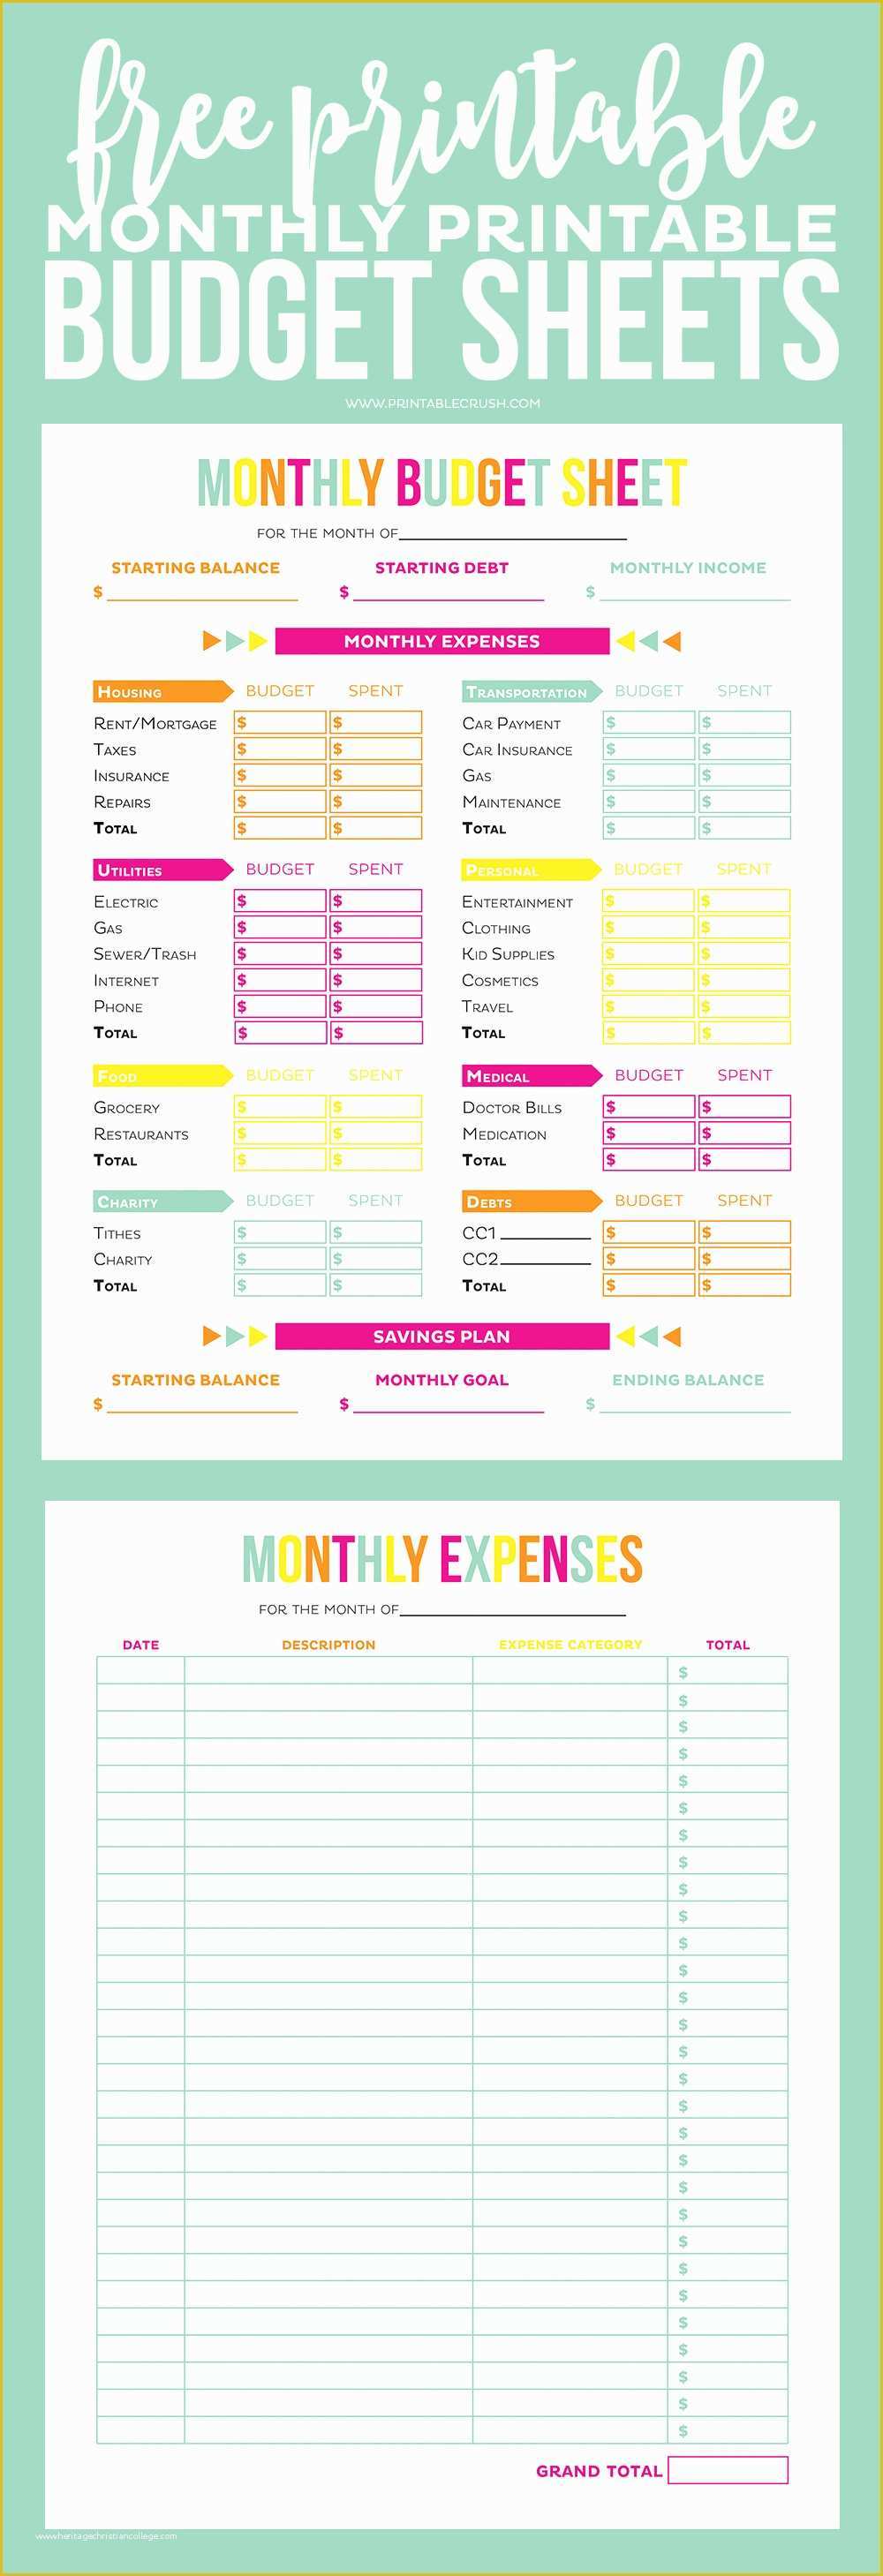 Best Free Monthly Budget Template Of Free Printable Monthly Bud Sheets 7 Best Images Of